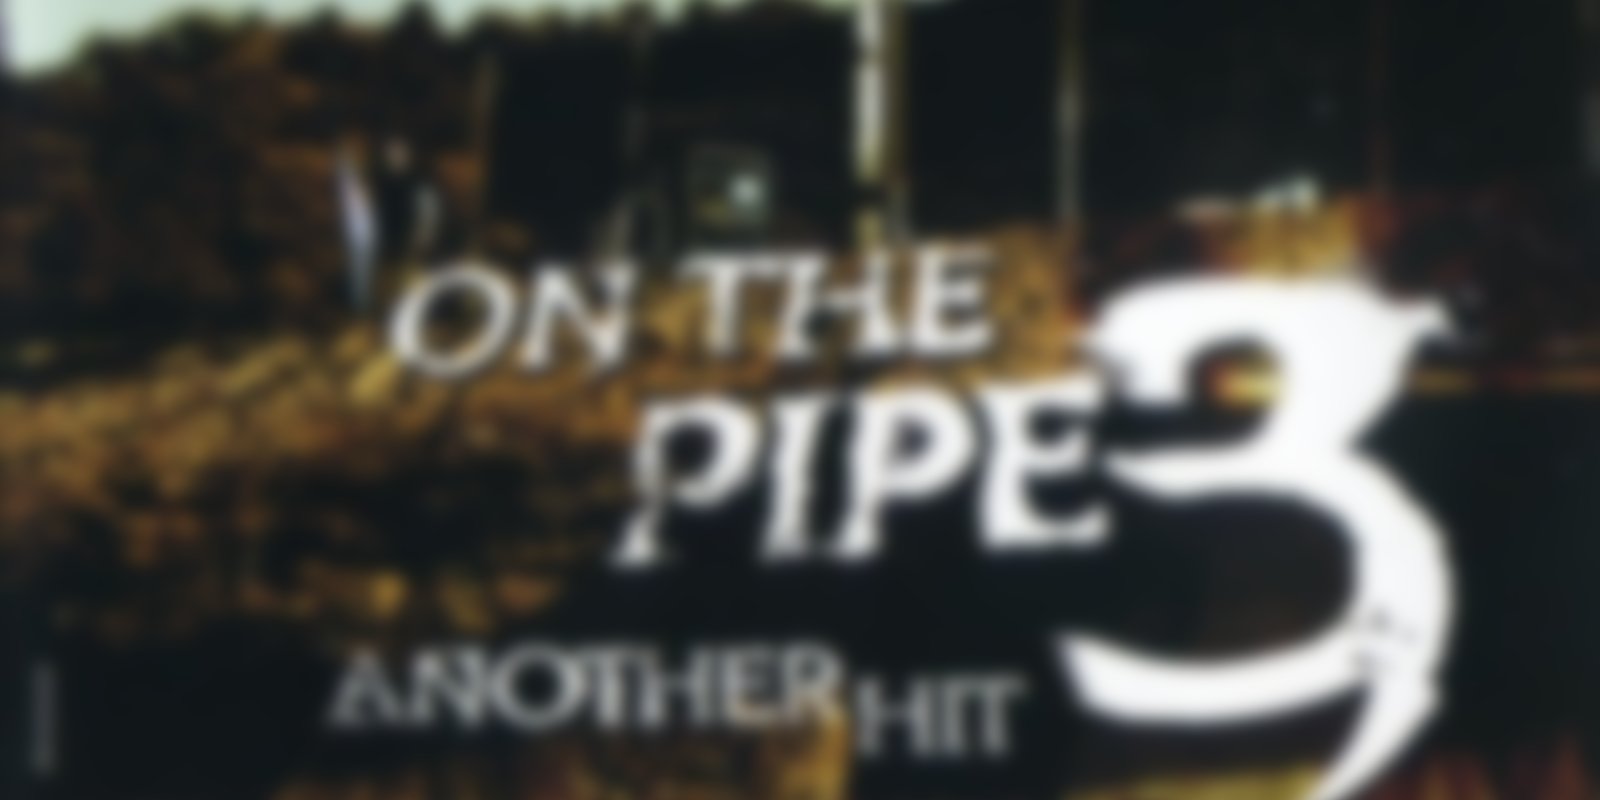 On the Pipe 3